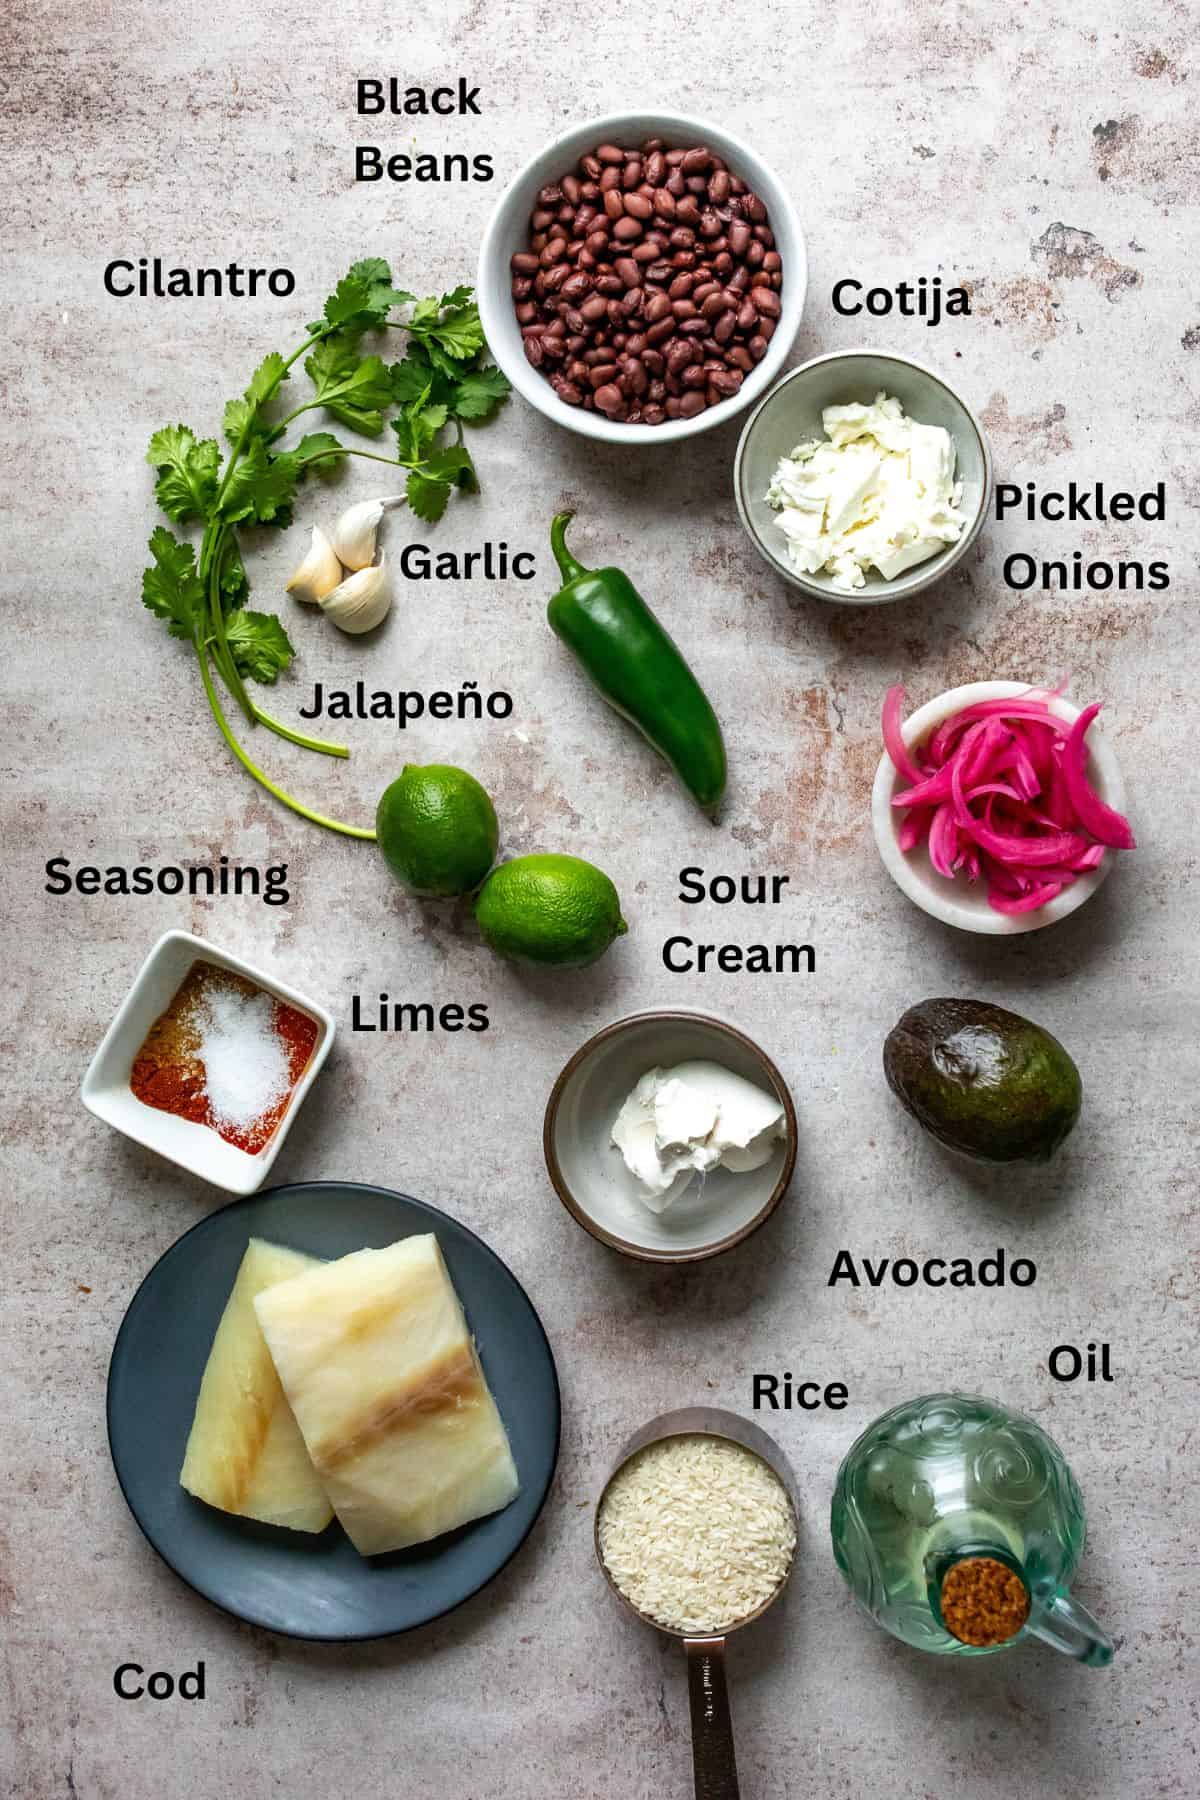 All ingredients on a counter on small plates and bowls.